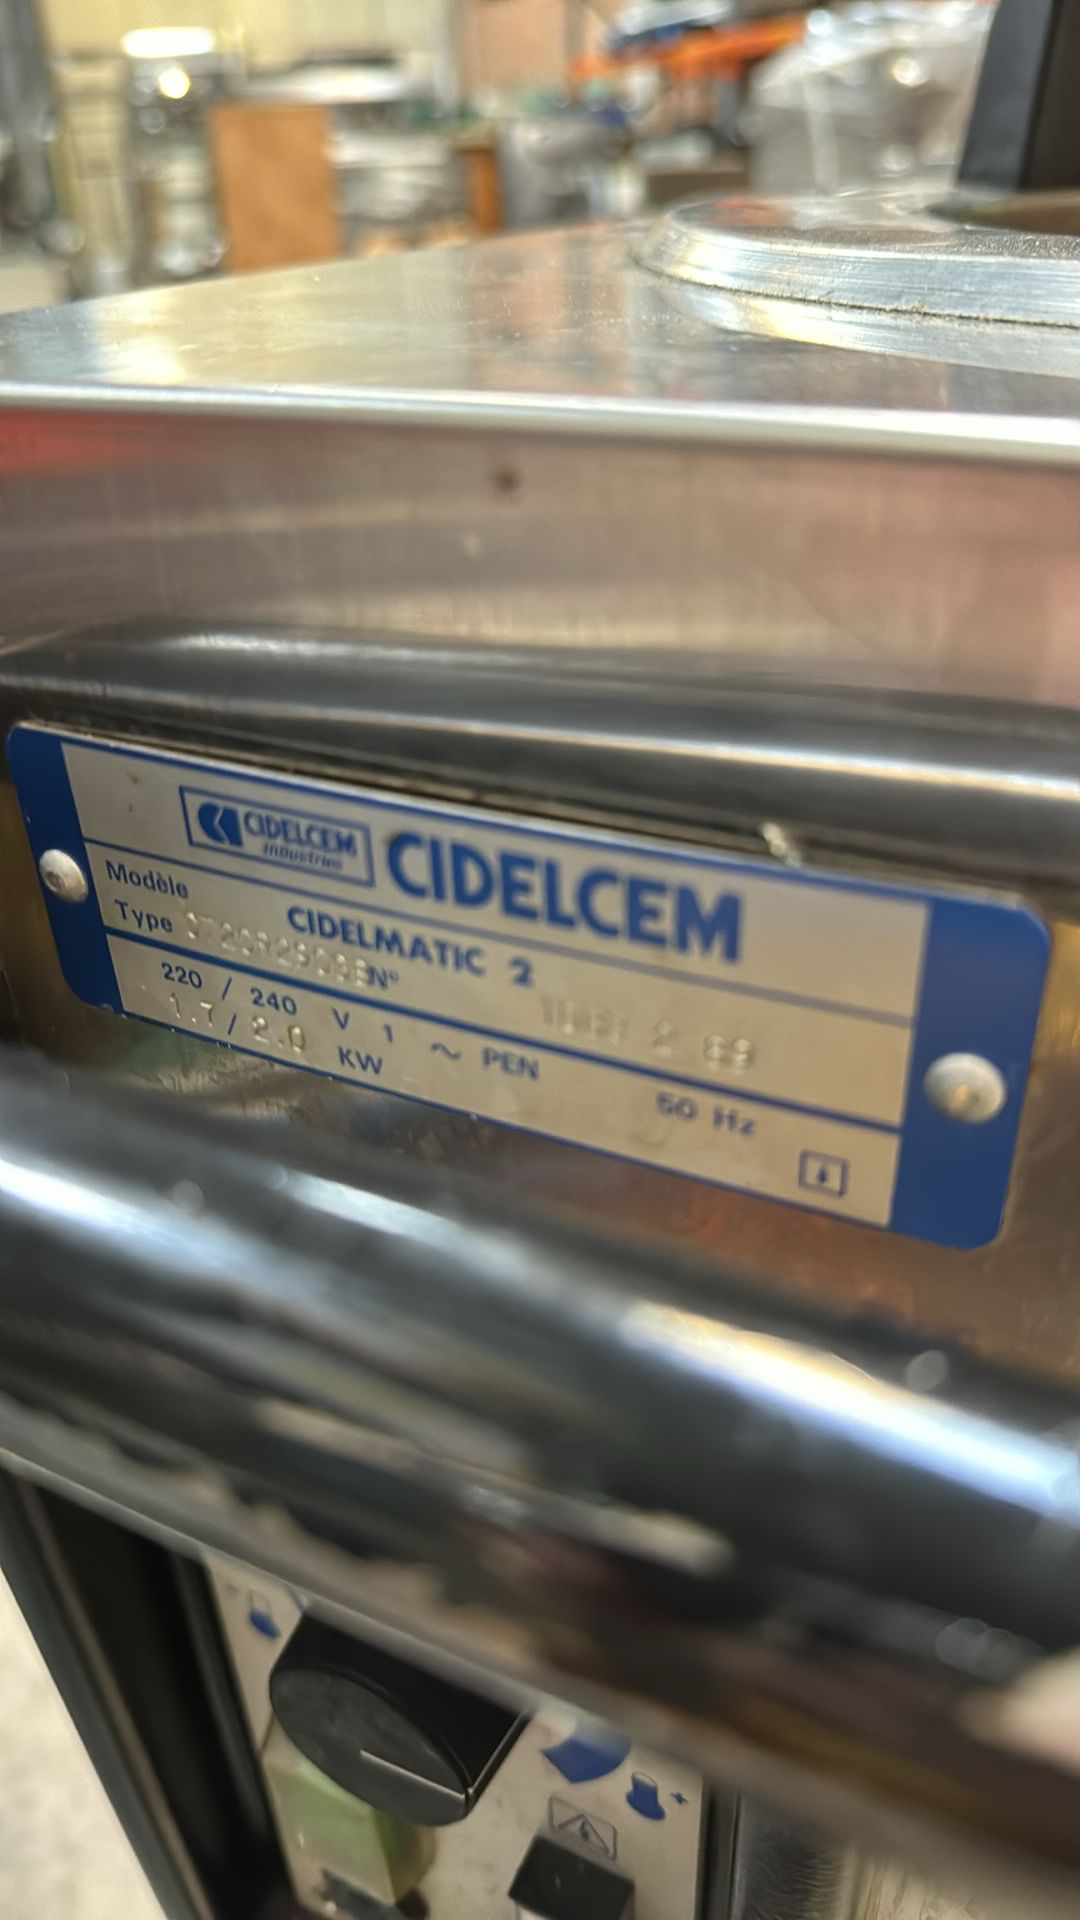 CIDELCEM - Cidelmatic 2, Plate Warmer - Image 8 of 8